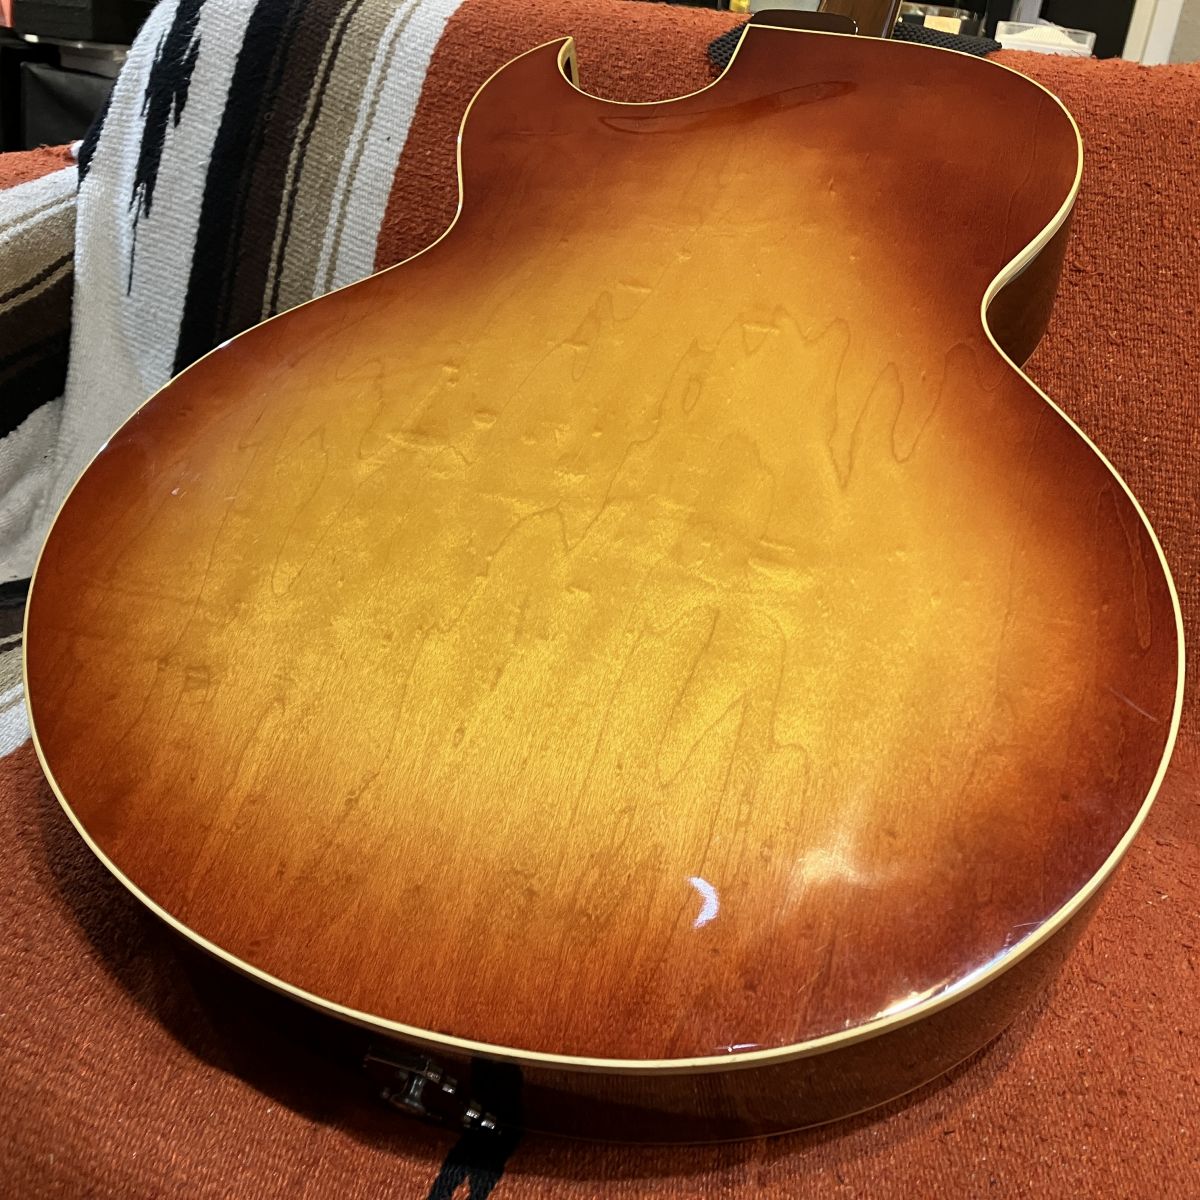 [SN 127154 MADE IN USA] USED Gibson / Early 70s ES-175D Sunburst [04]